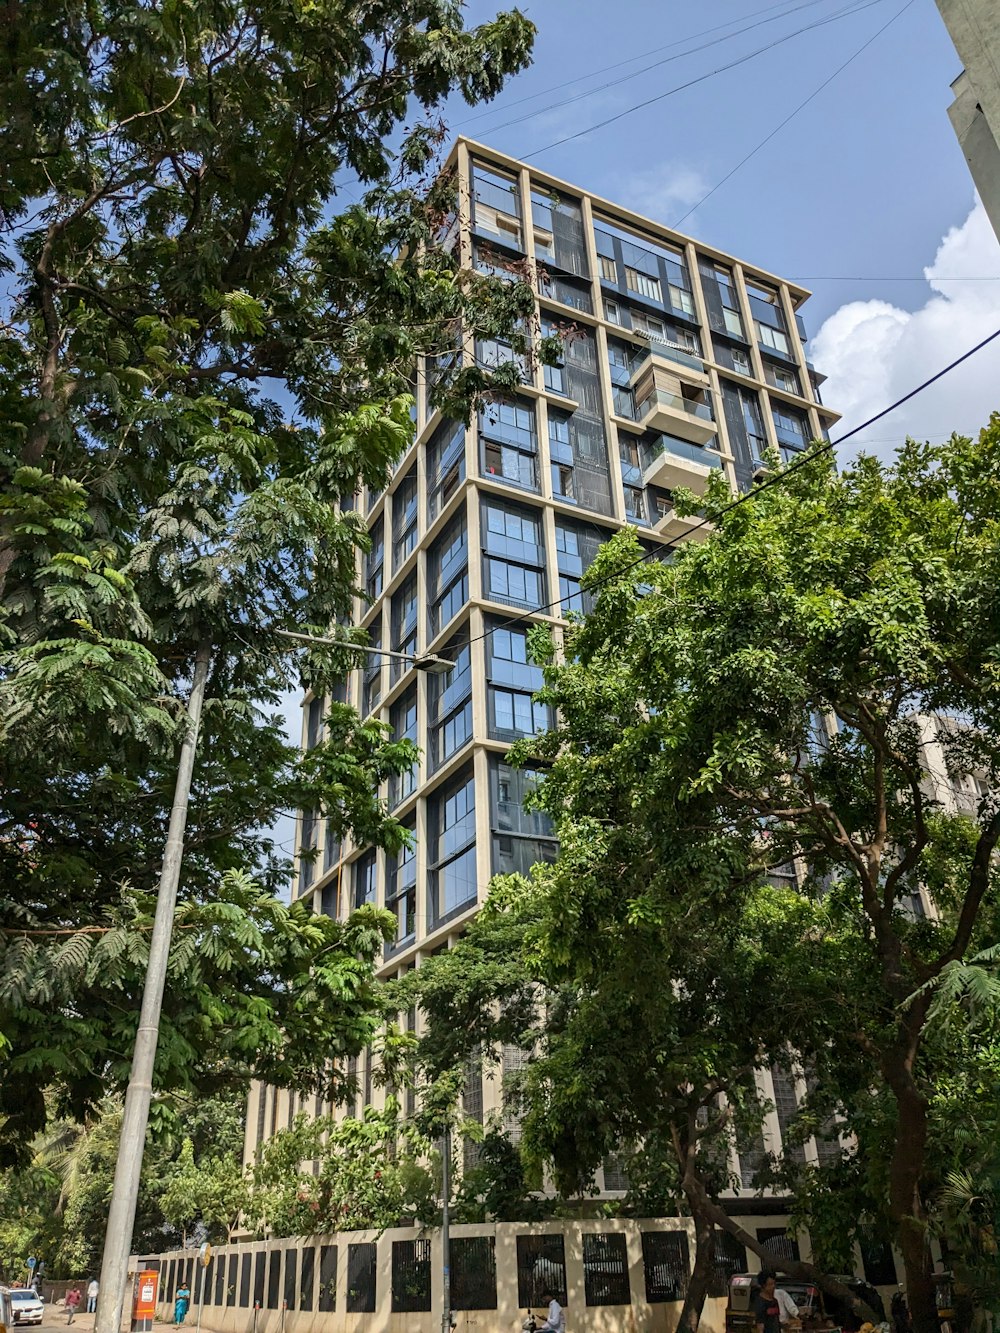 a tall building with lots of windows next to trees